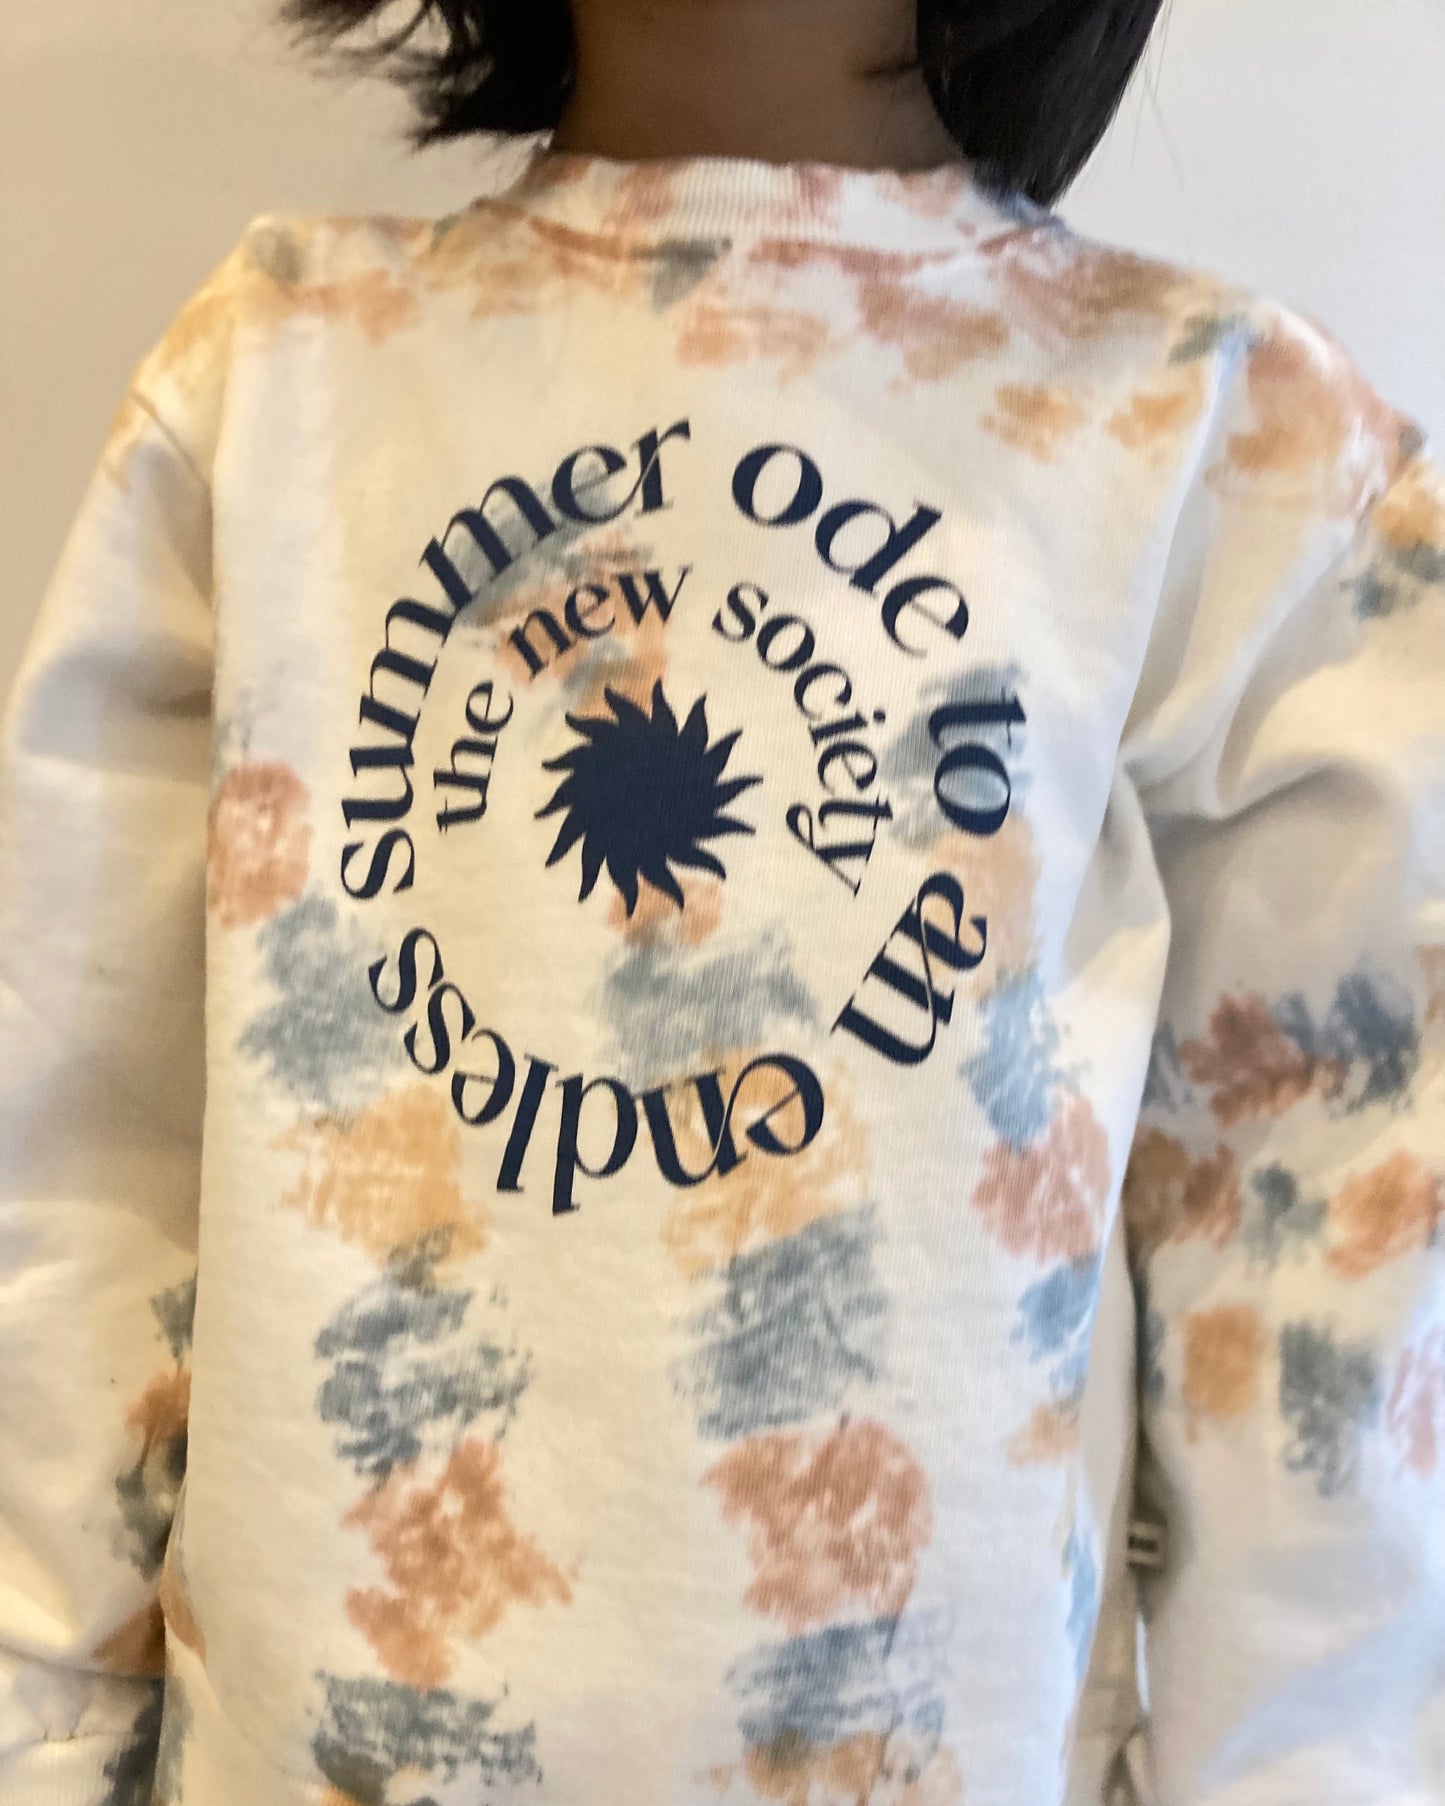 the new society / enrico sweater tie dye